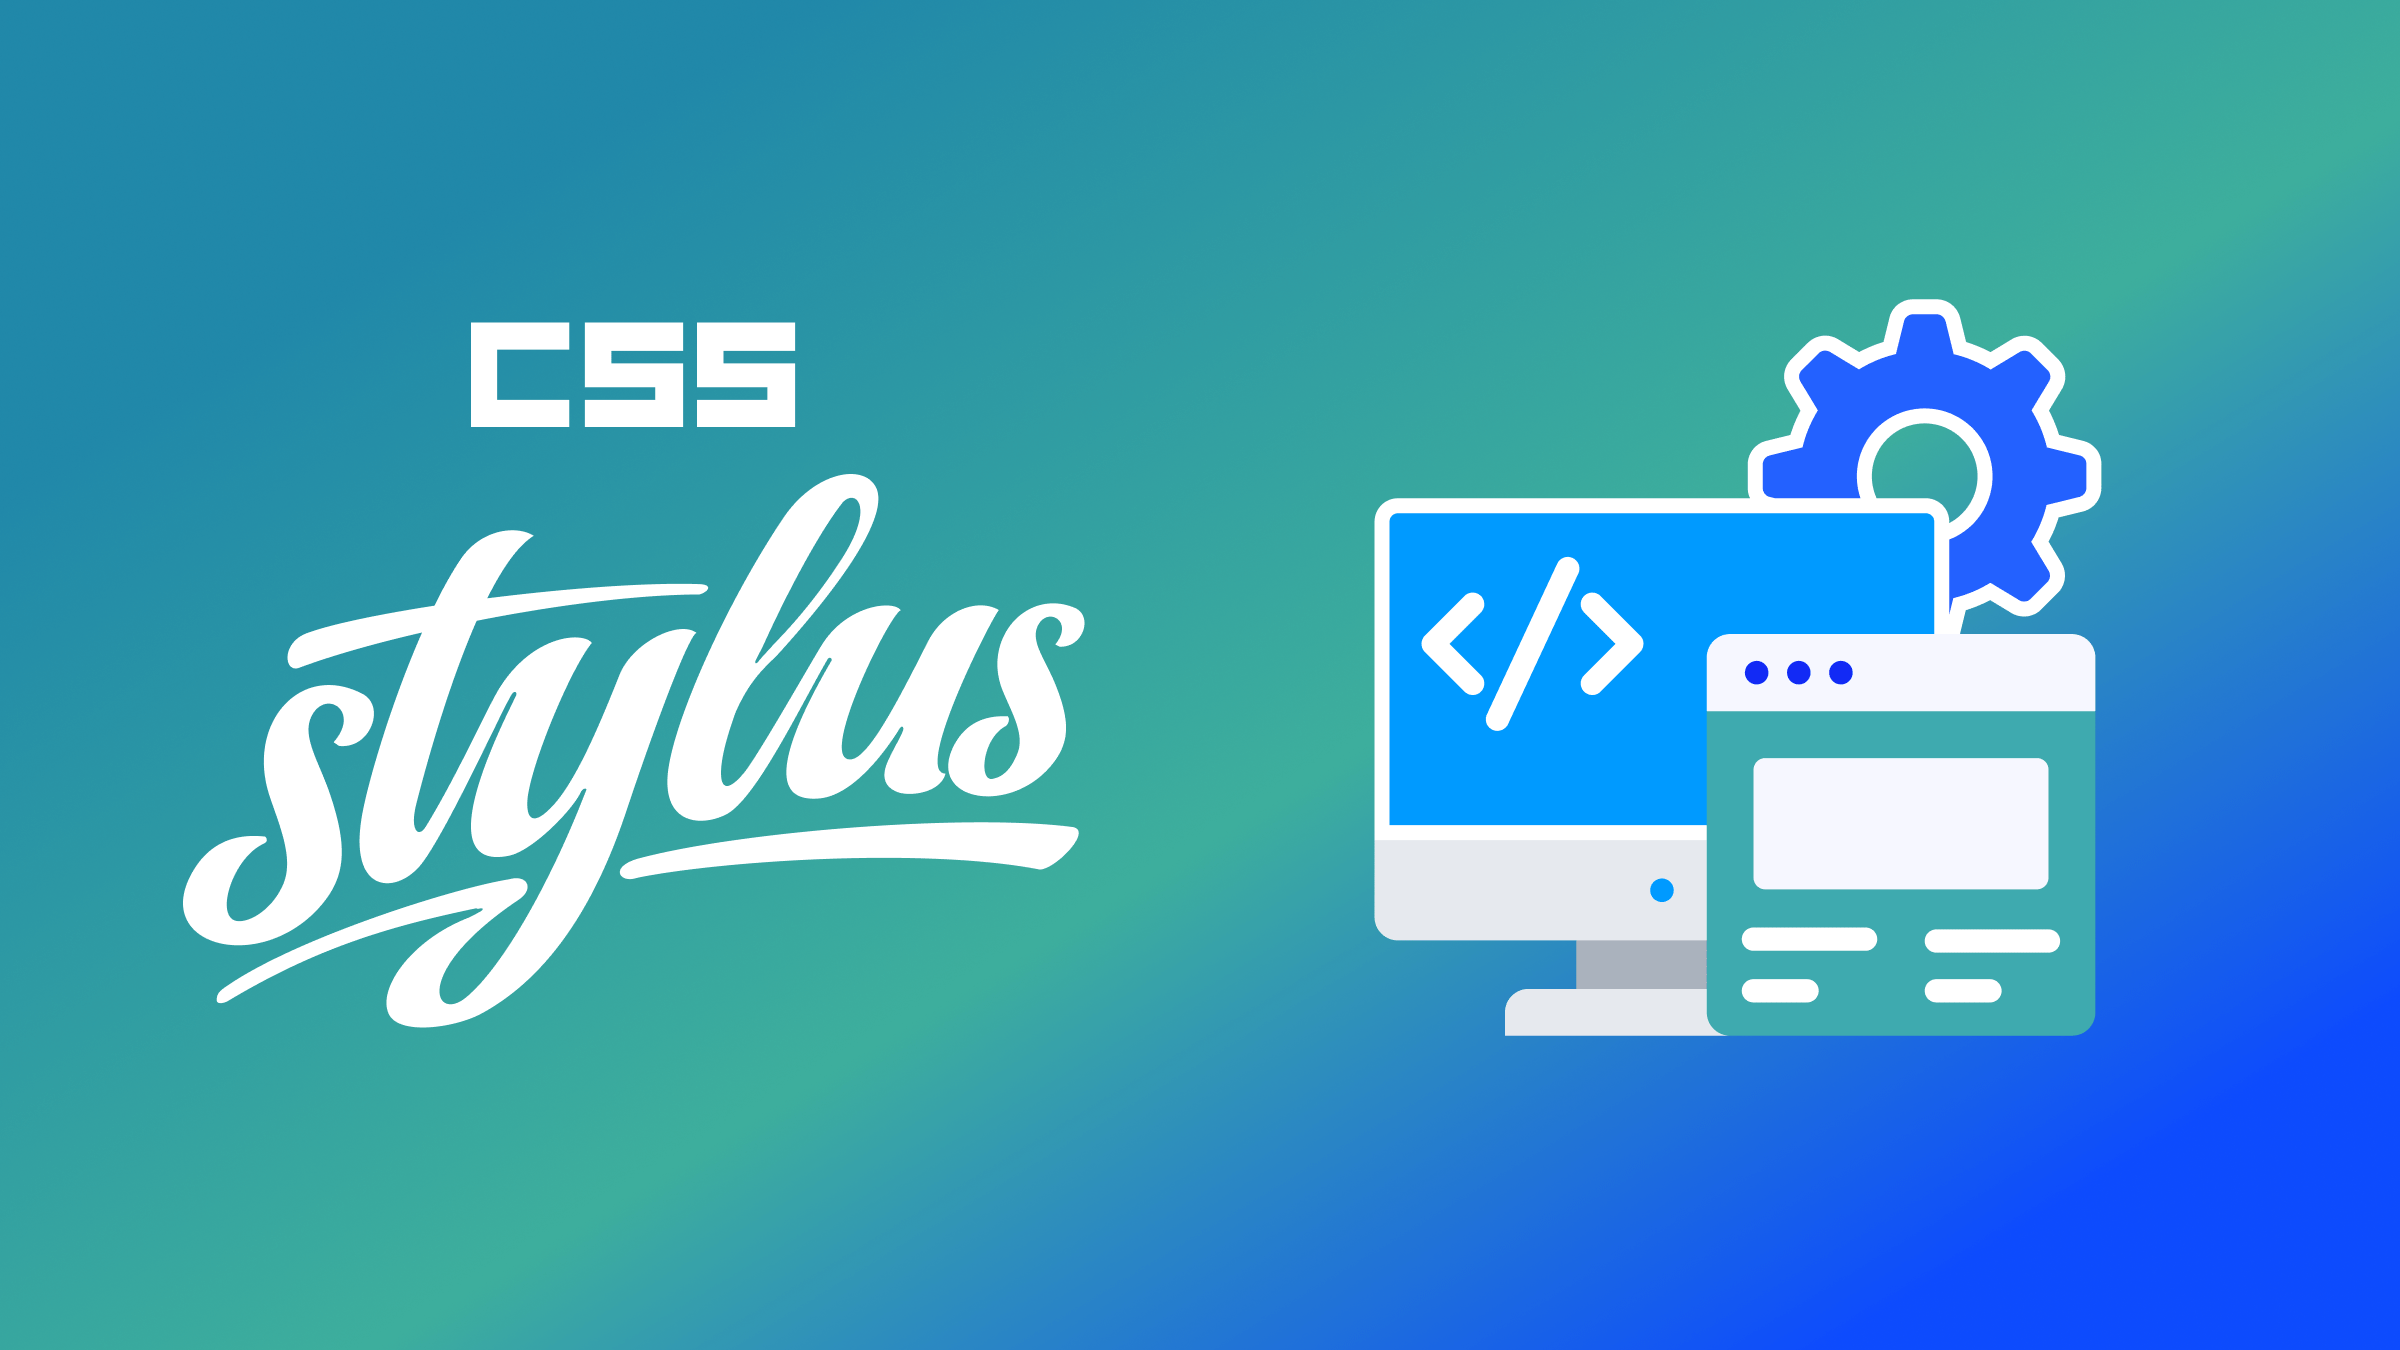 Using CSS Stylus in your projects